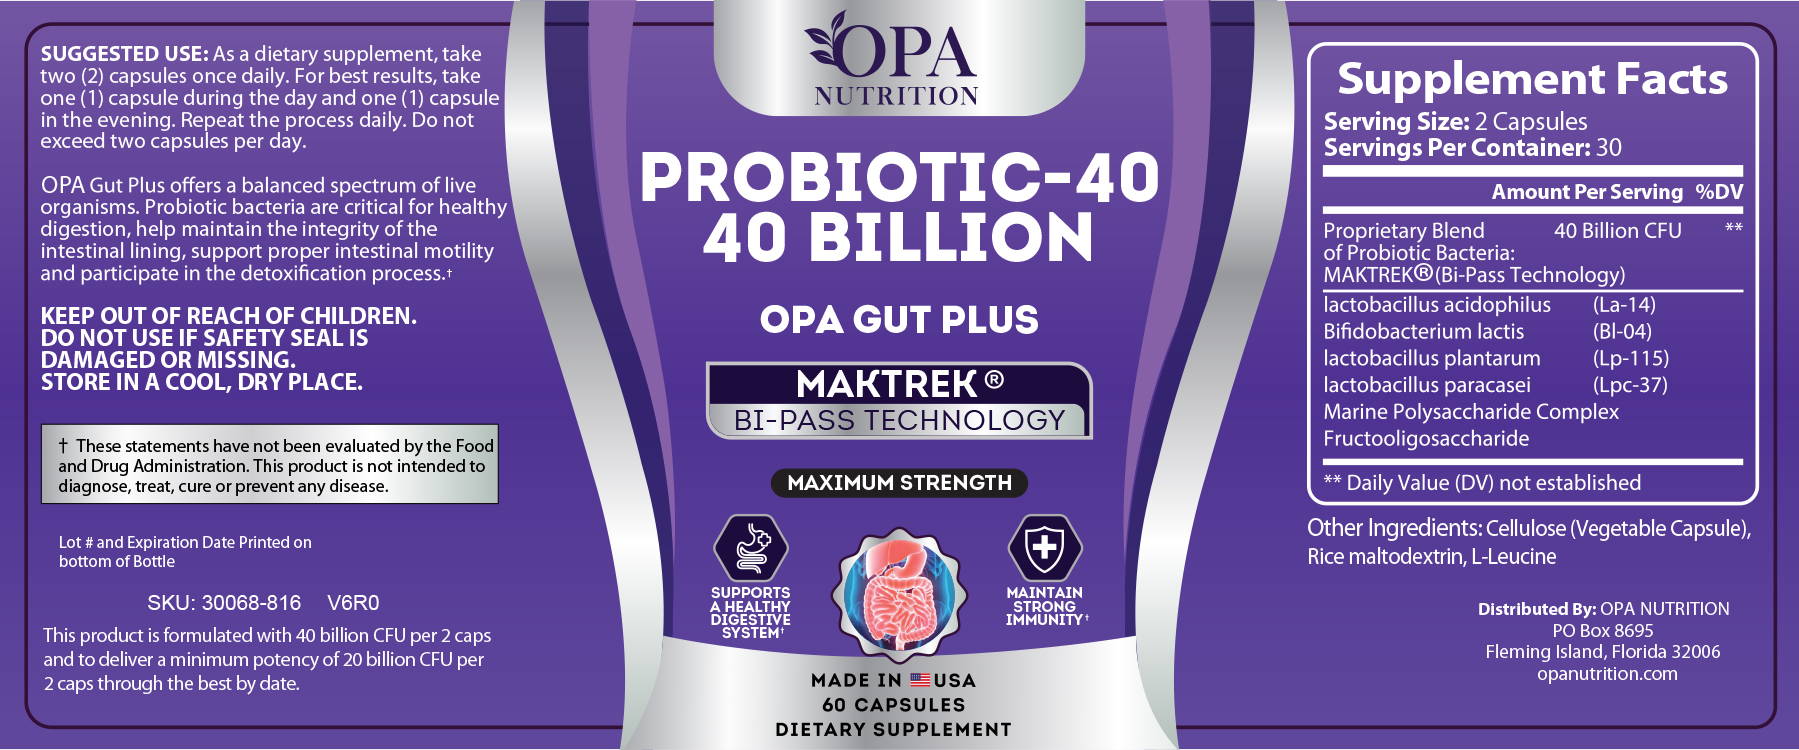 OPA NUTRITION PROBIOTIC-40 LABELS and DIRECTIONS